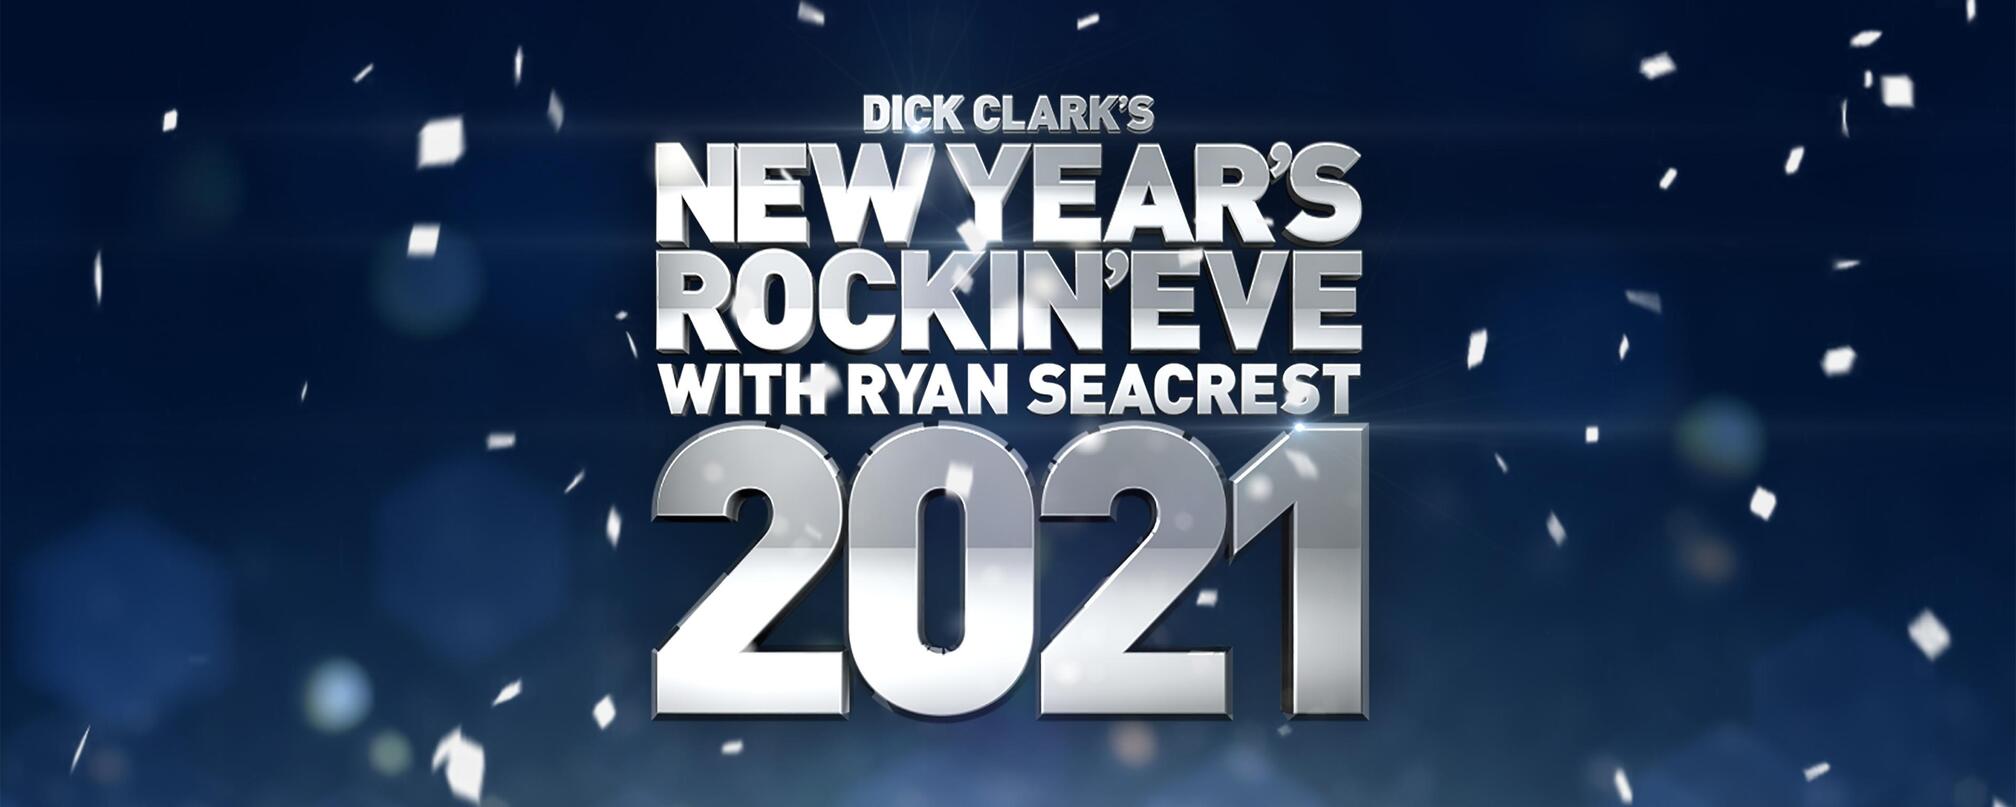 Dick clark new years 2021 time